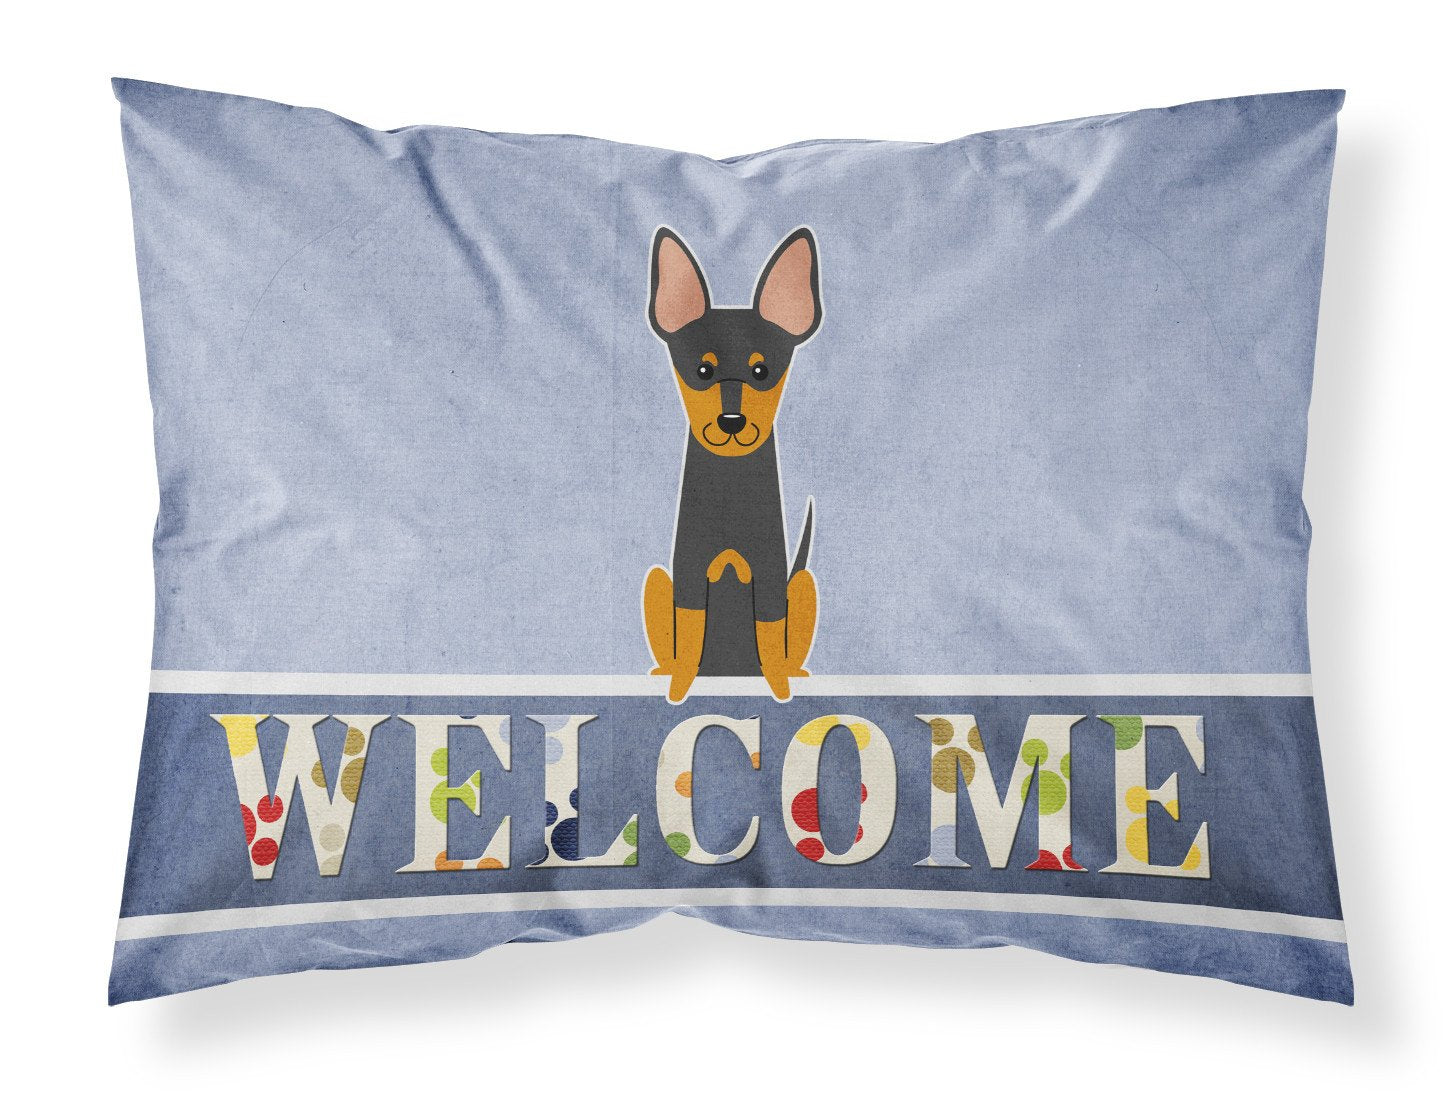 English Toy Terrier Welcome Fabric Standard Pillowcase BB5690PILLOWCASE by Caroline's Treasures